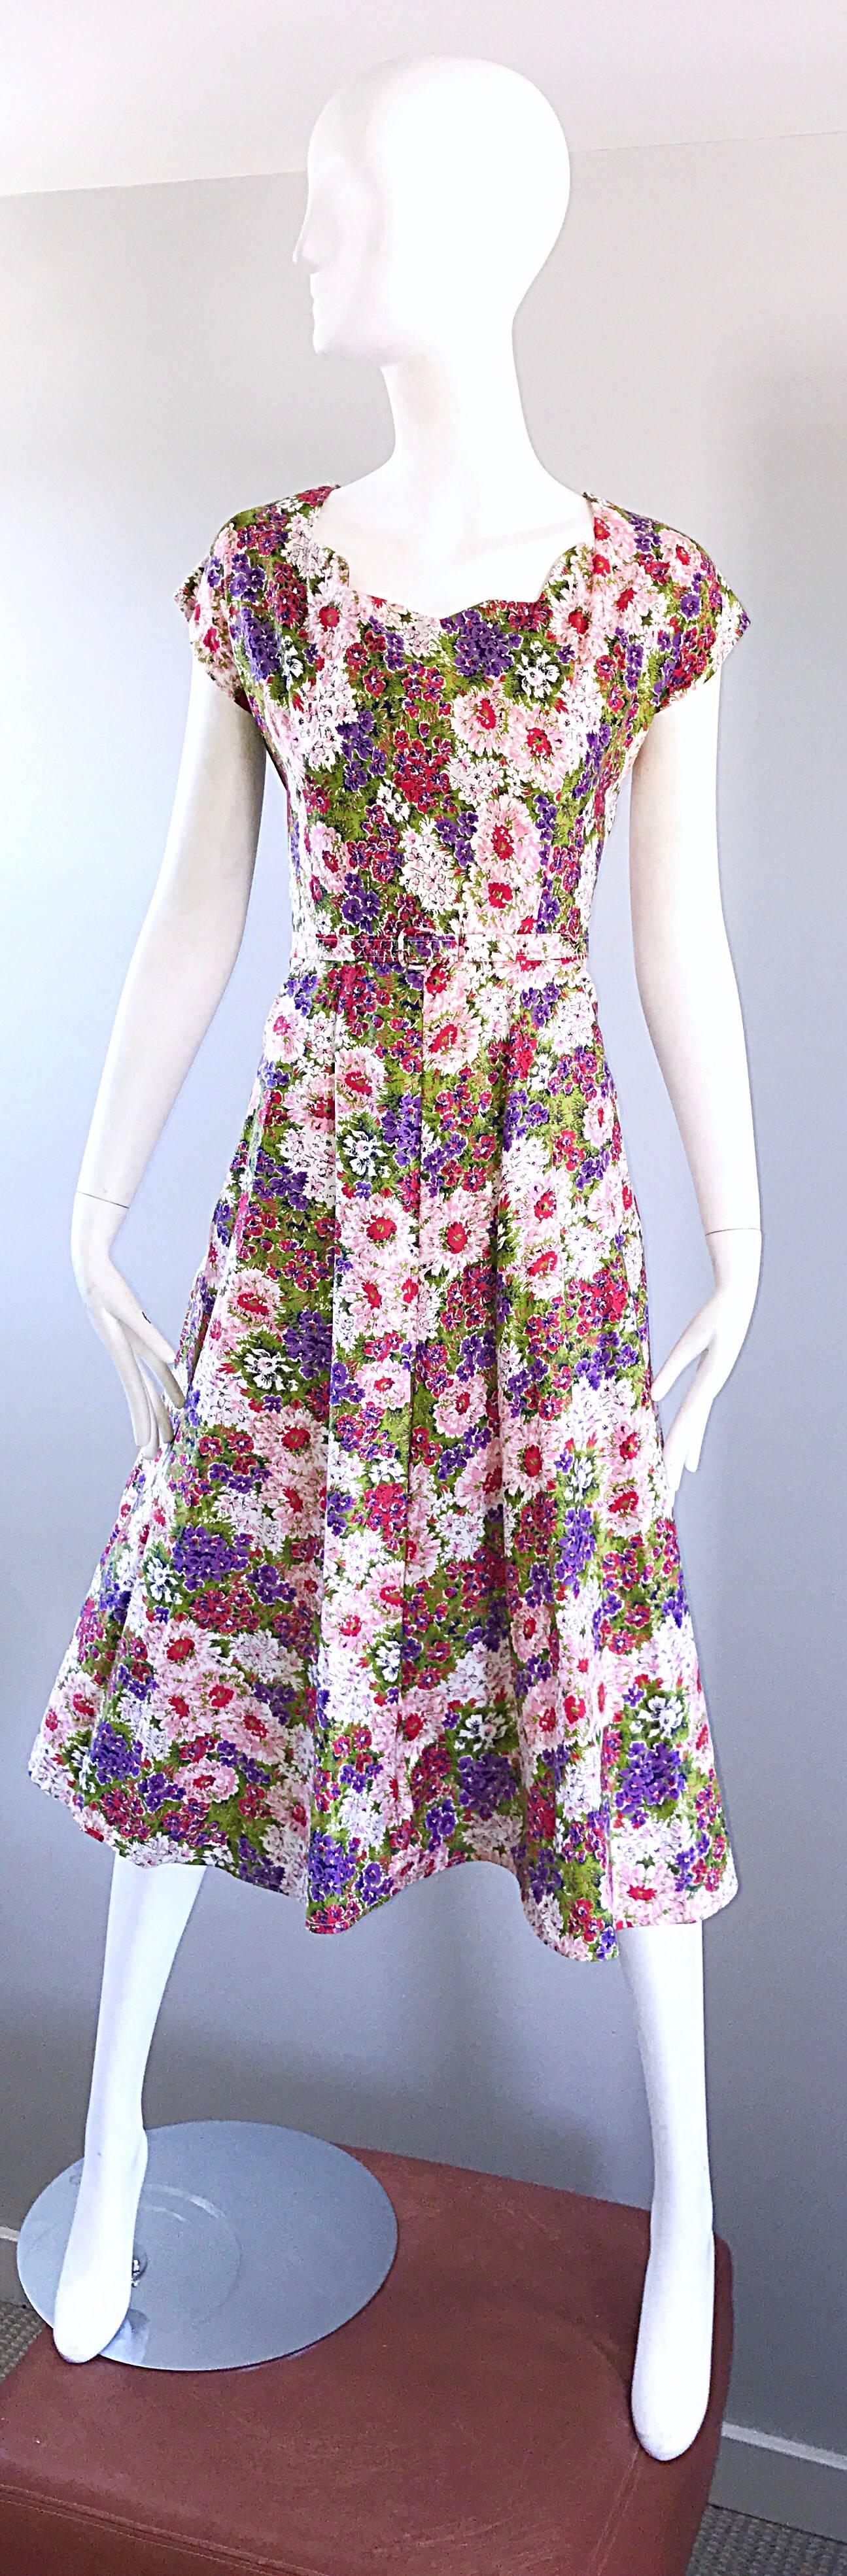 Gorgeous 1950s demi couture flower printed rhinestone encrusted scalloped neck cotton fit n' flare dress! Features vibrant colored floral print in purple, red, pink, green and white. Rhinestones hand-sewn above the bust, below the scallops.